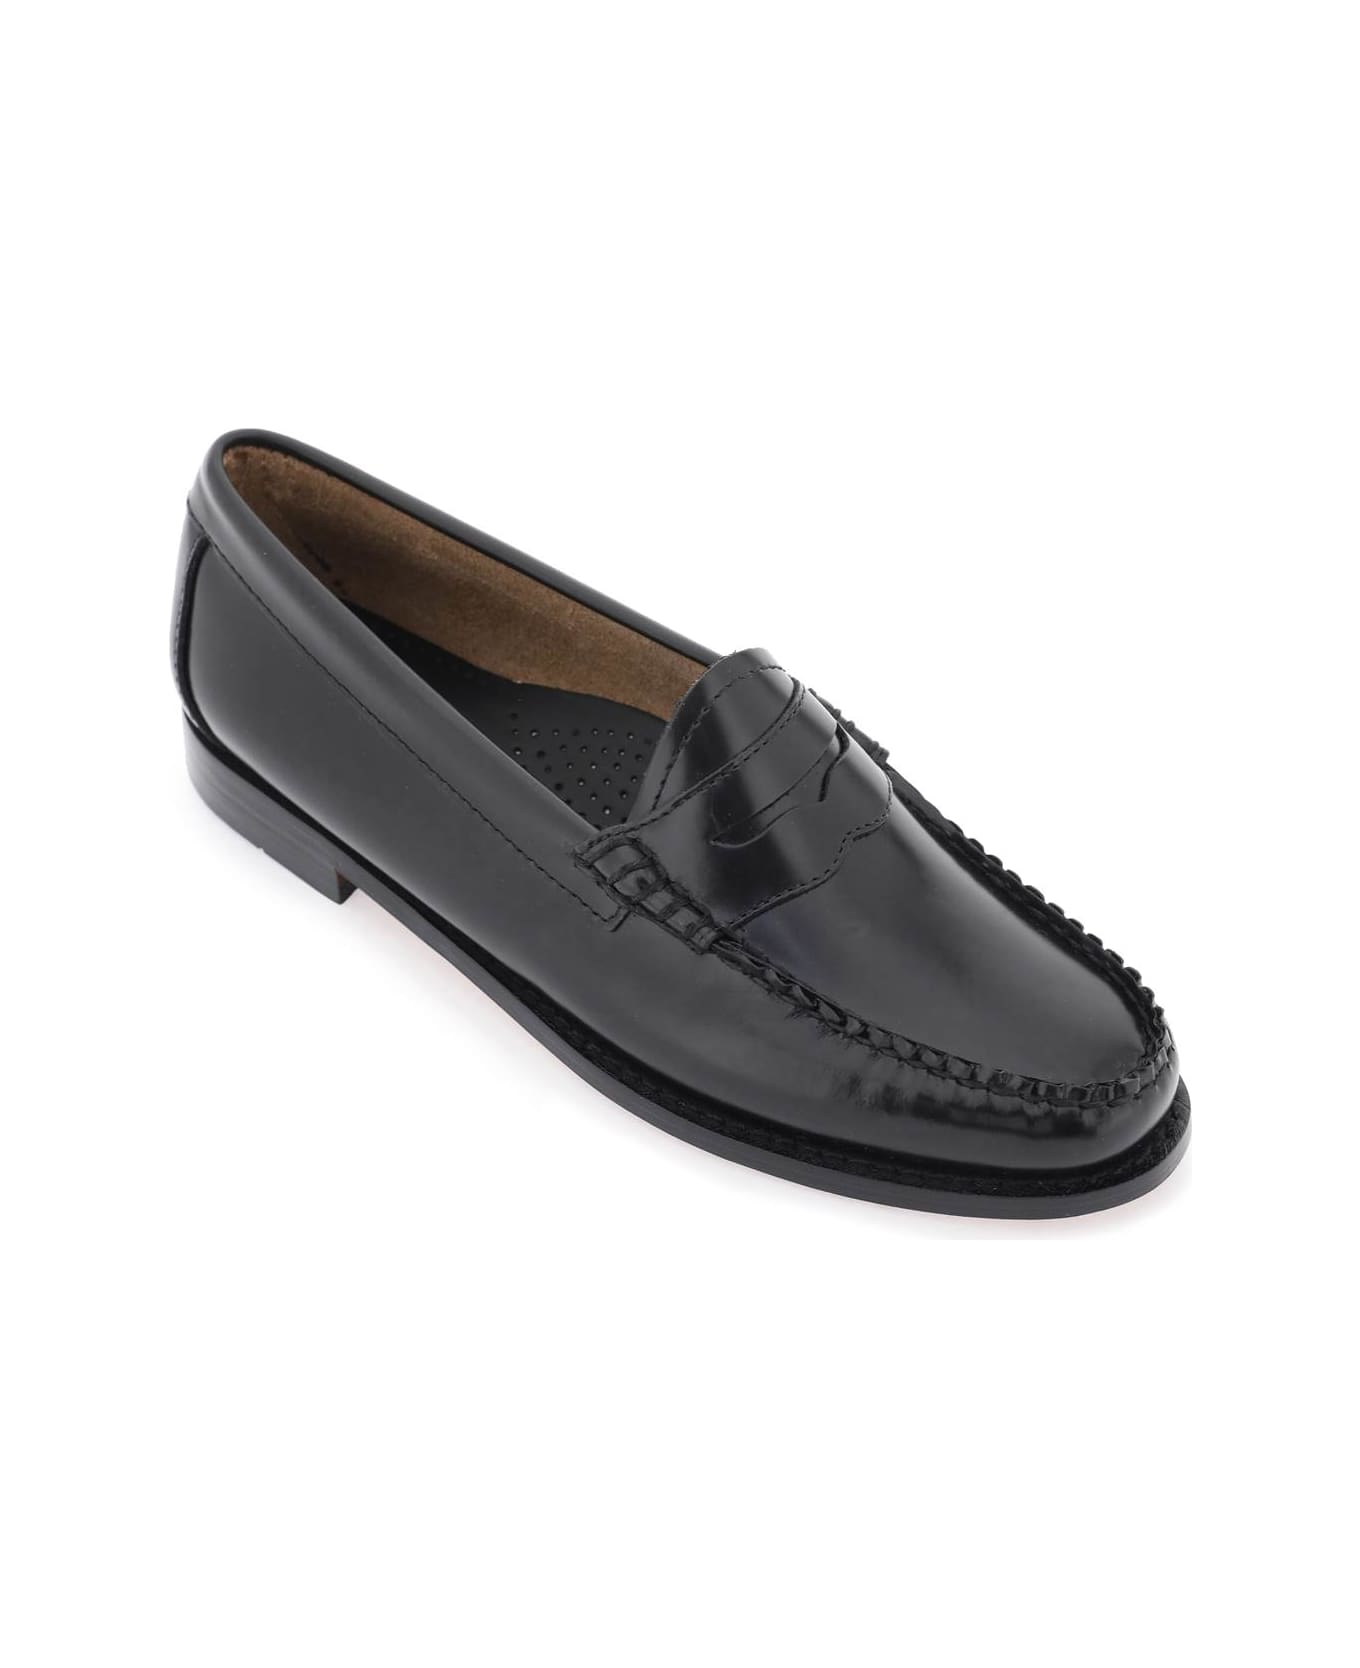 G.H.Bass & Co. Weejuns Penny Loafers - BLACK (Black)